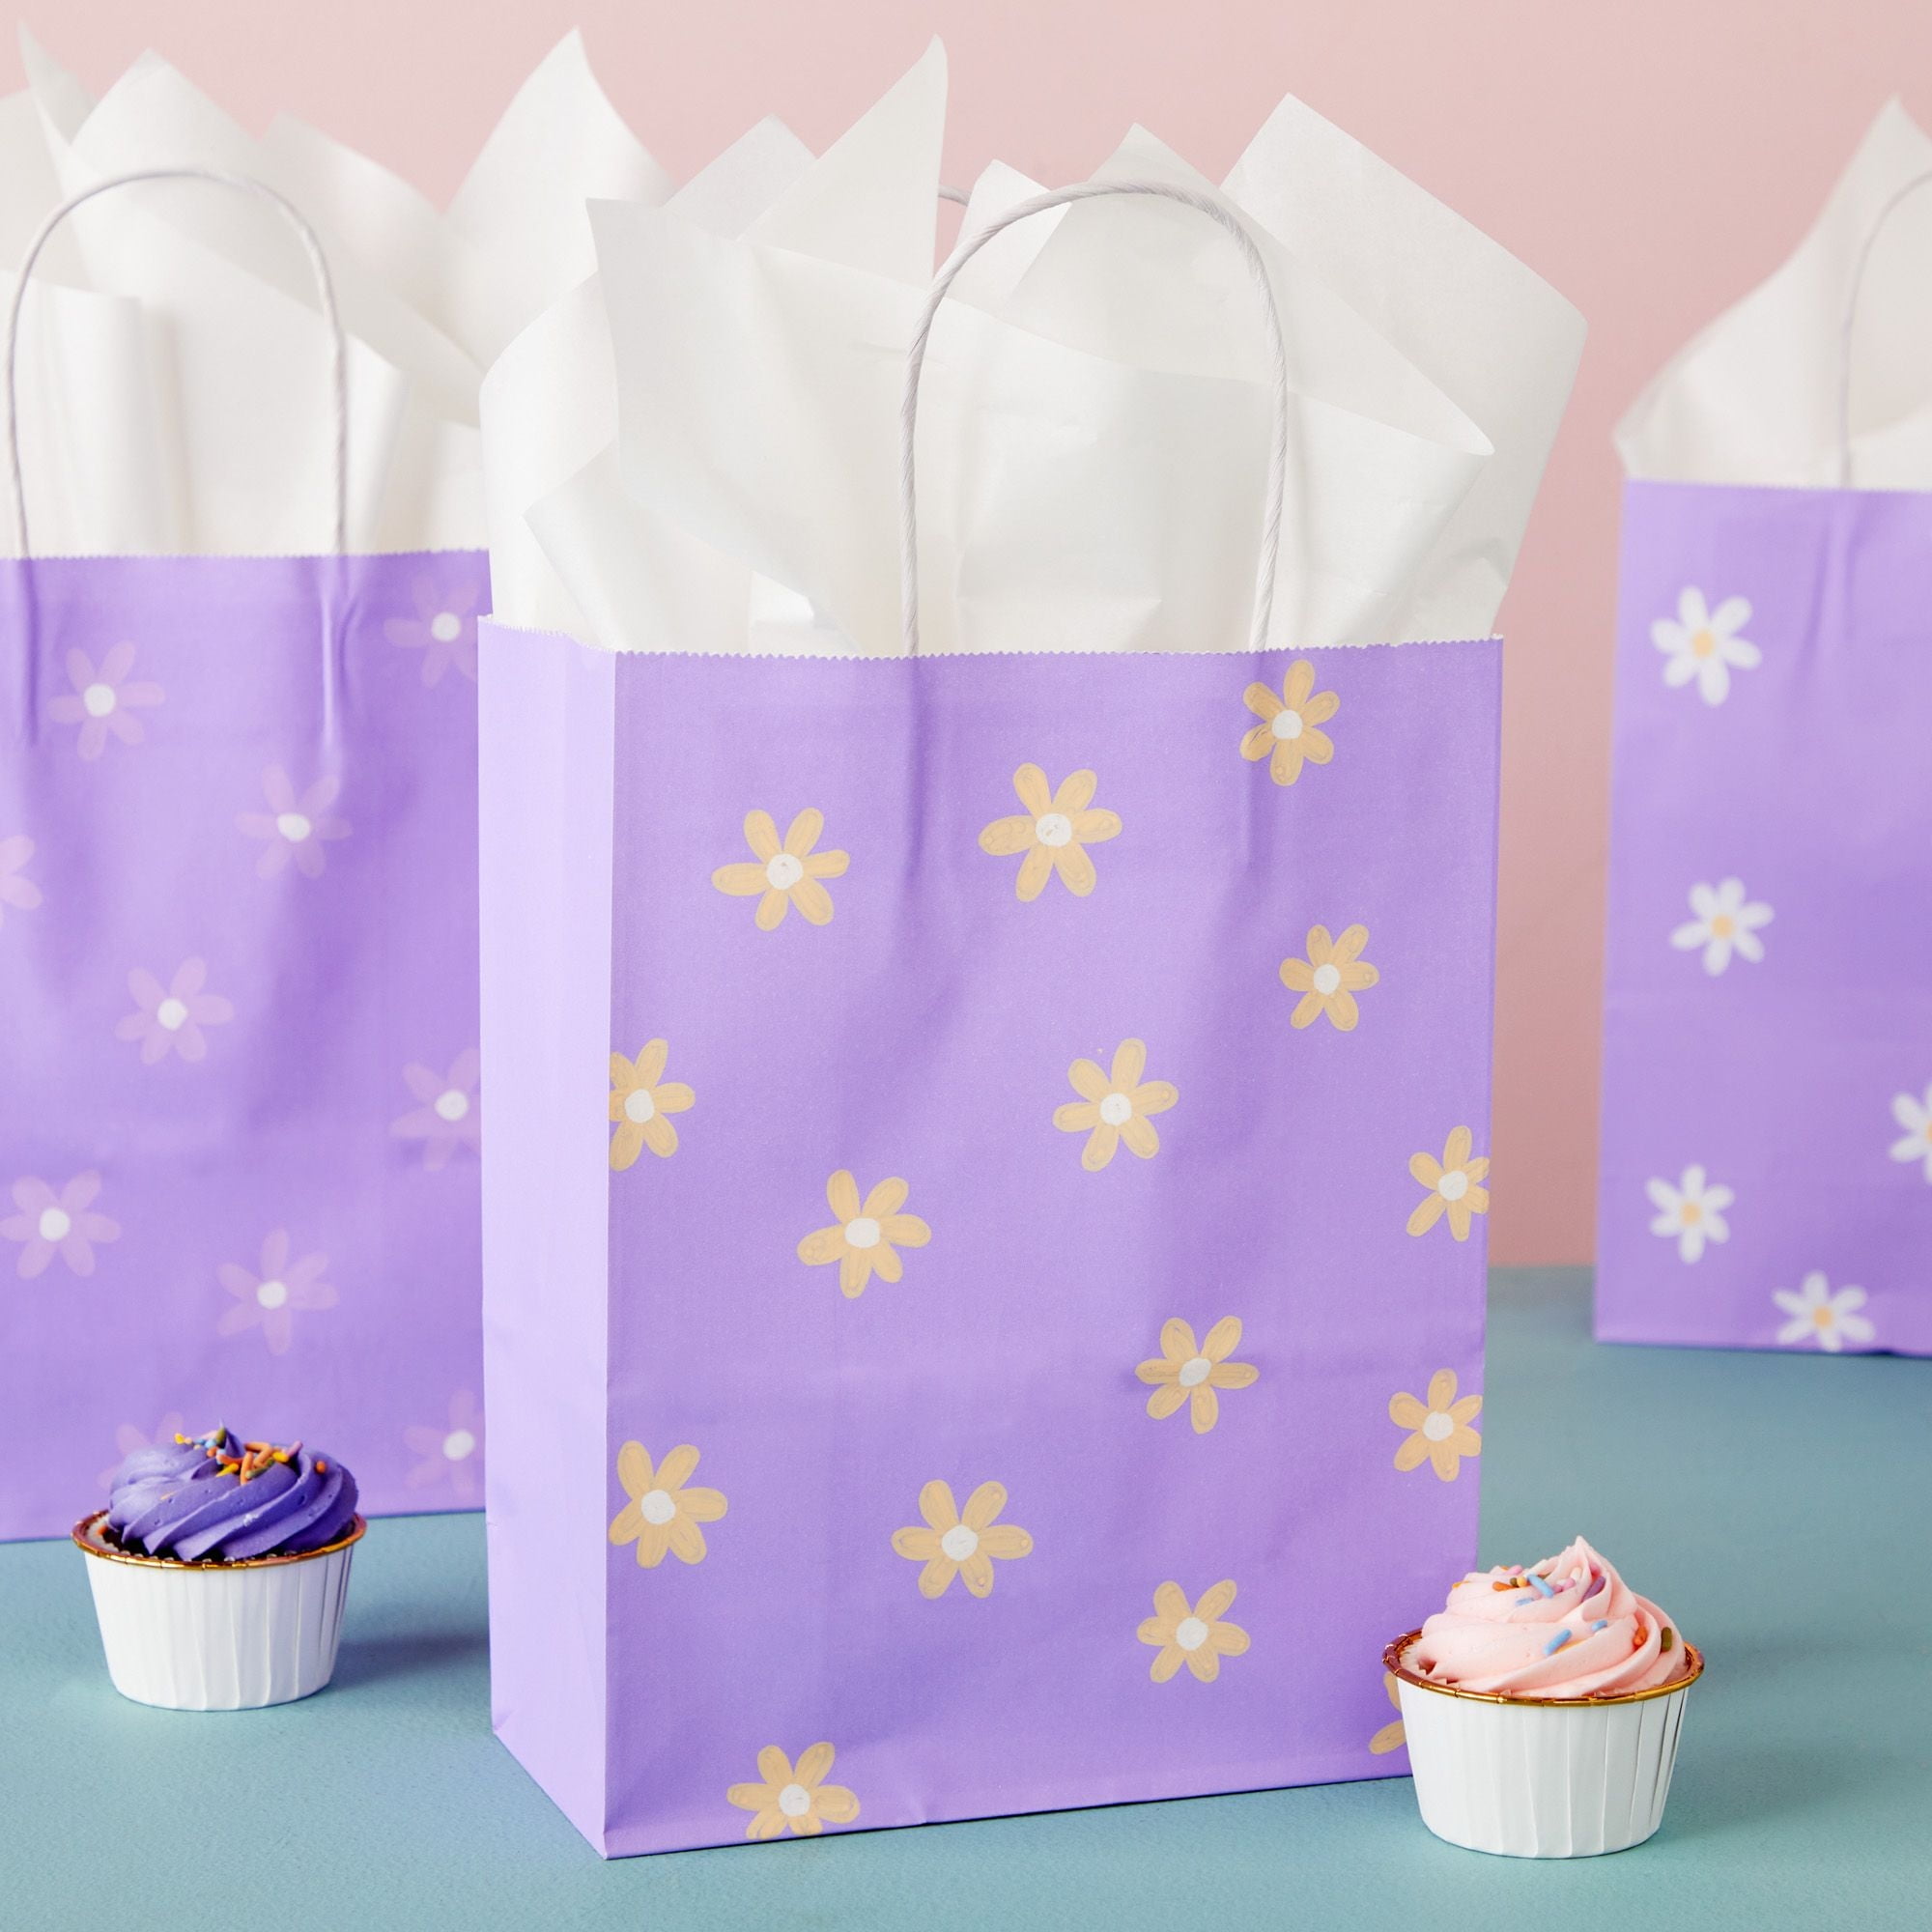 Purple Gift Bag stock image. Image of paper, carry, gift - 7325